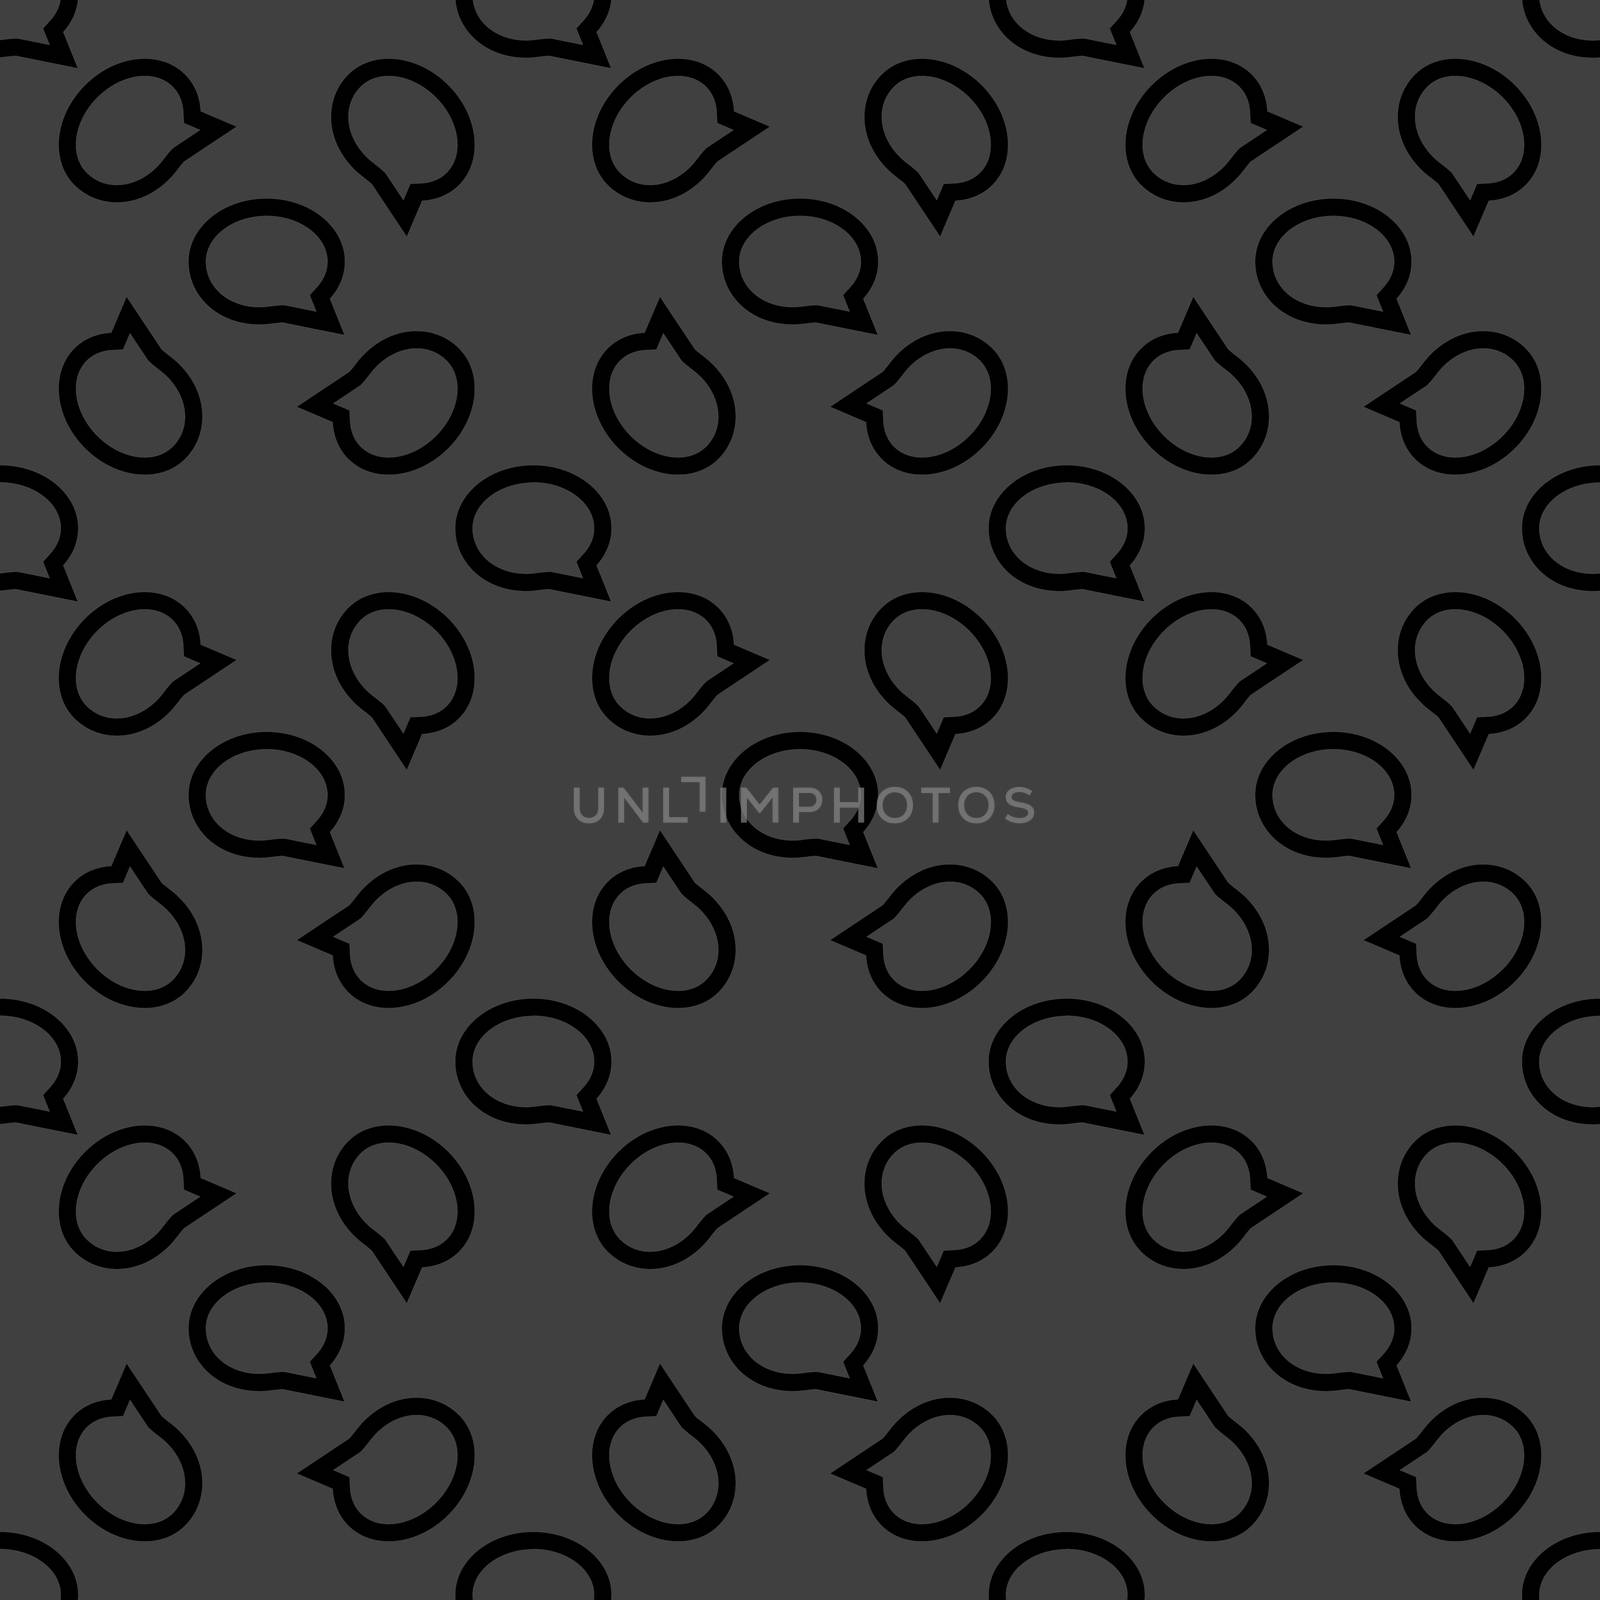 cloud thoughts web icon. flat design. Seamless pattern.